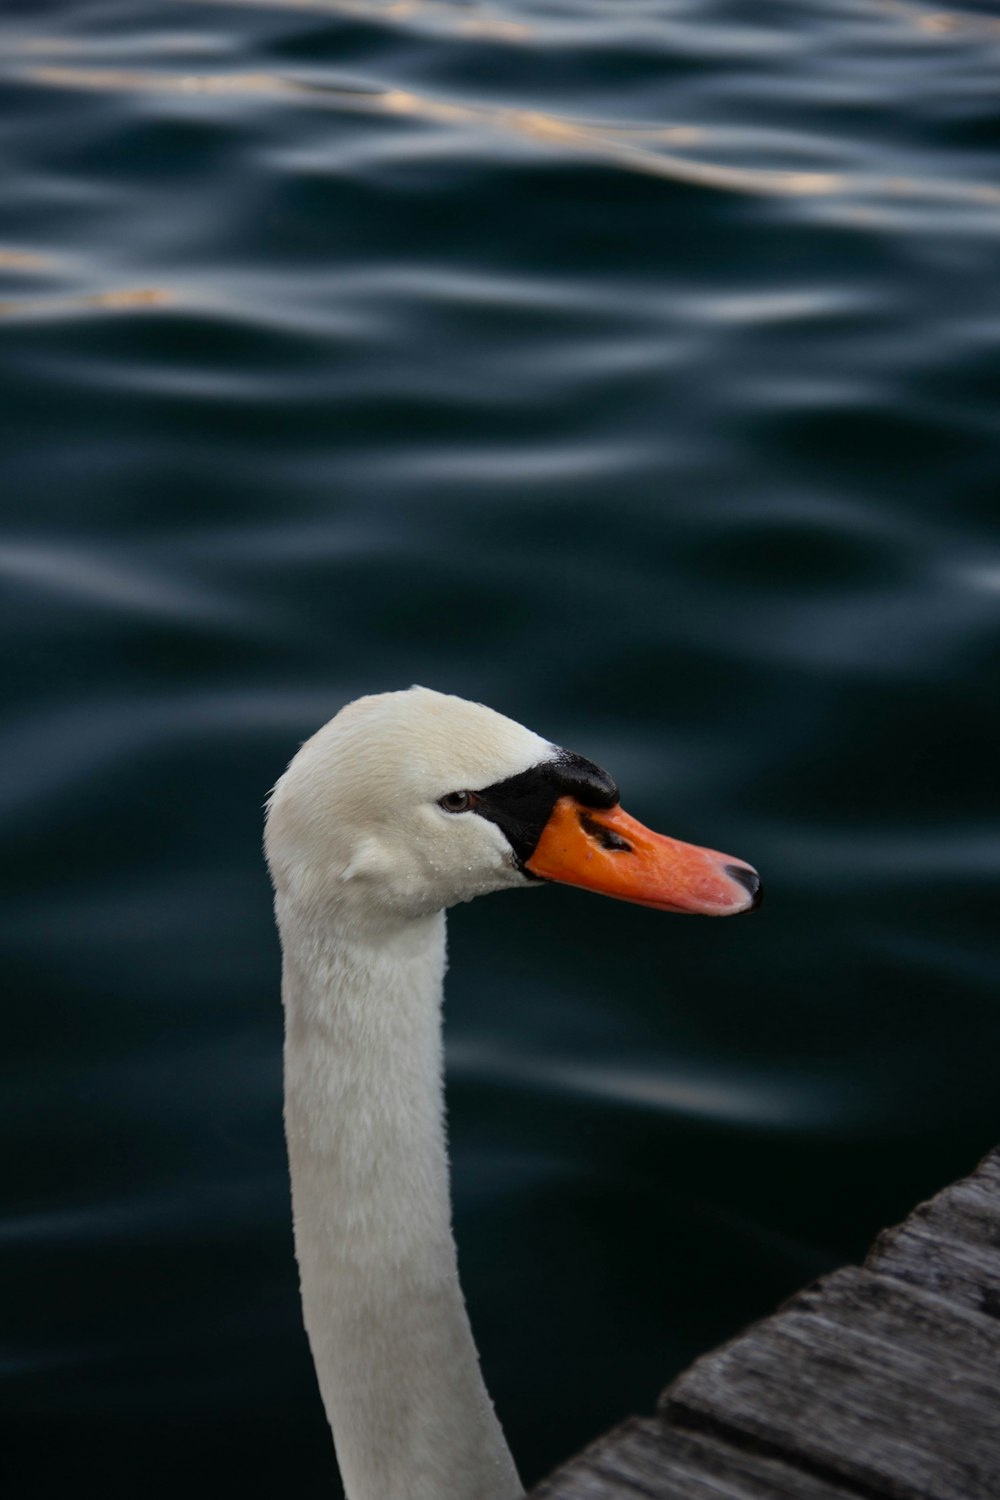 a close up of a duck on a body of water